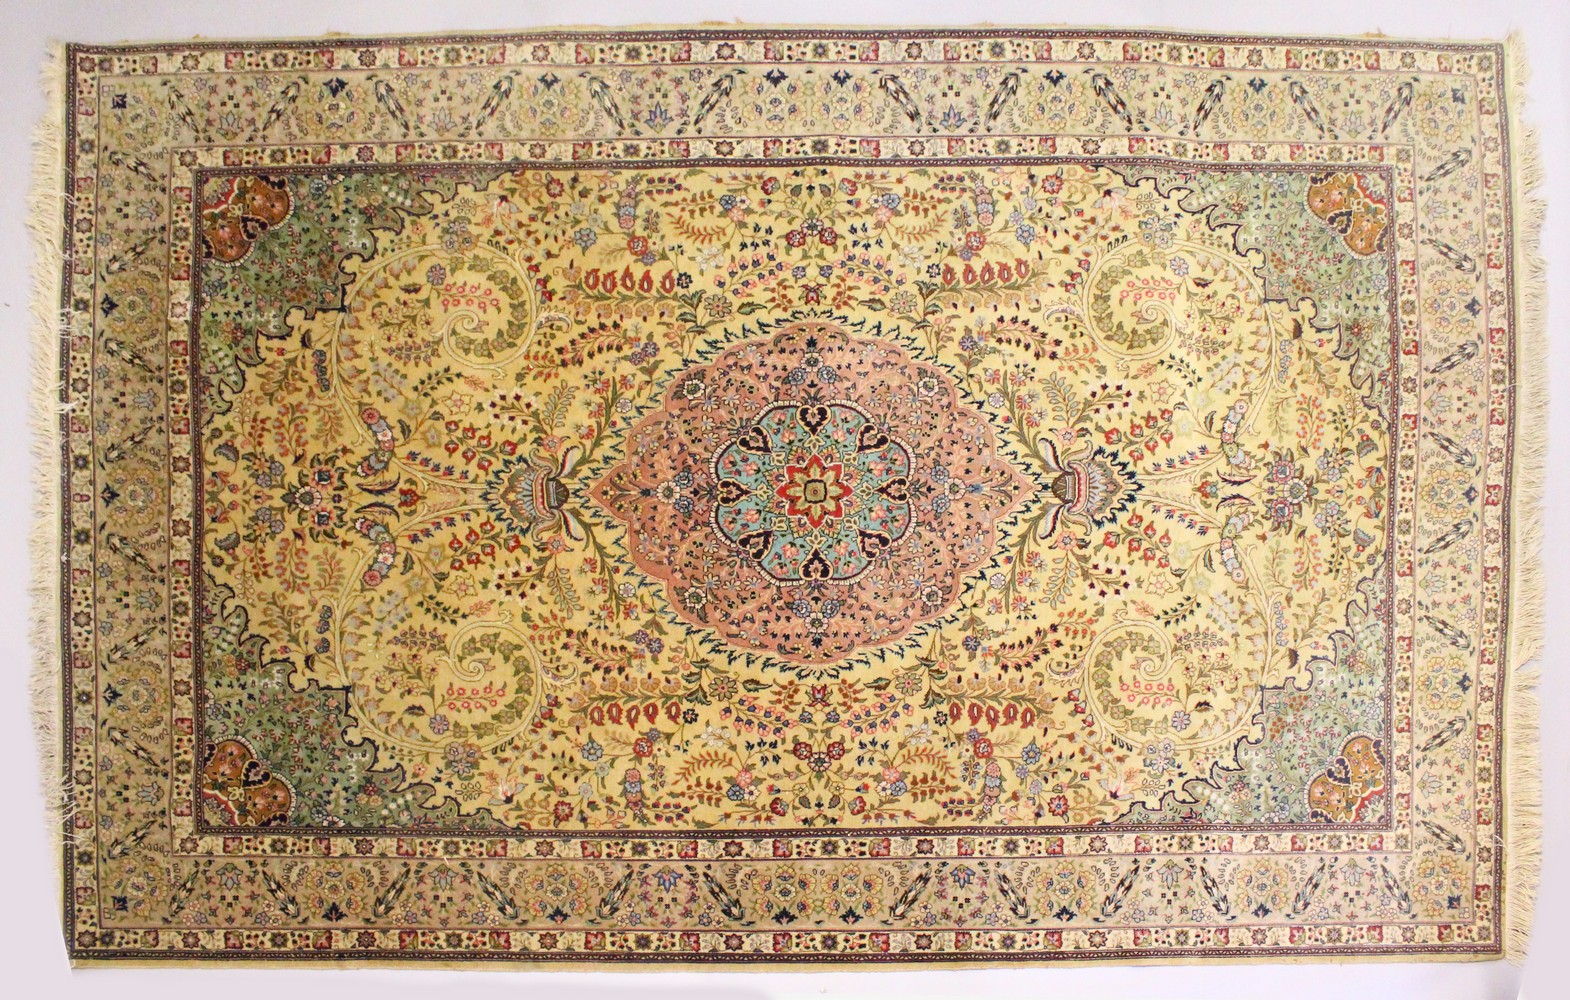 A GOOD PERSIAN CARPET, 20TH CENTURY, beige ground with central floral panel within a similar border.